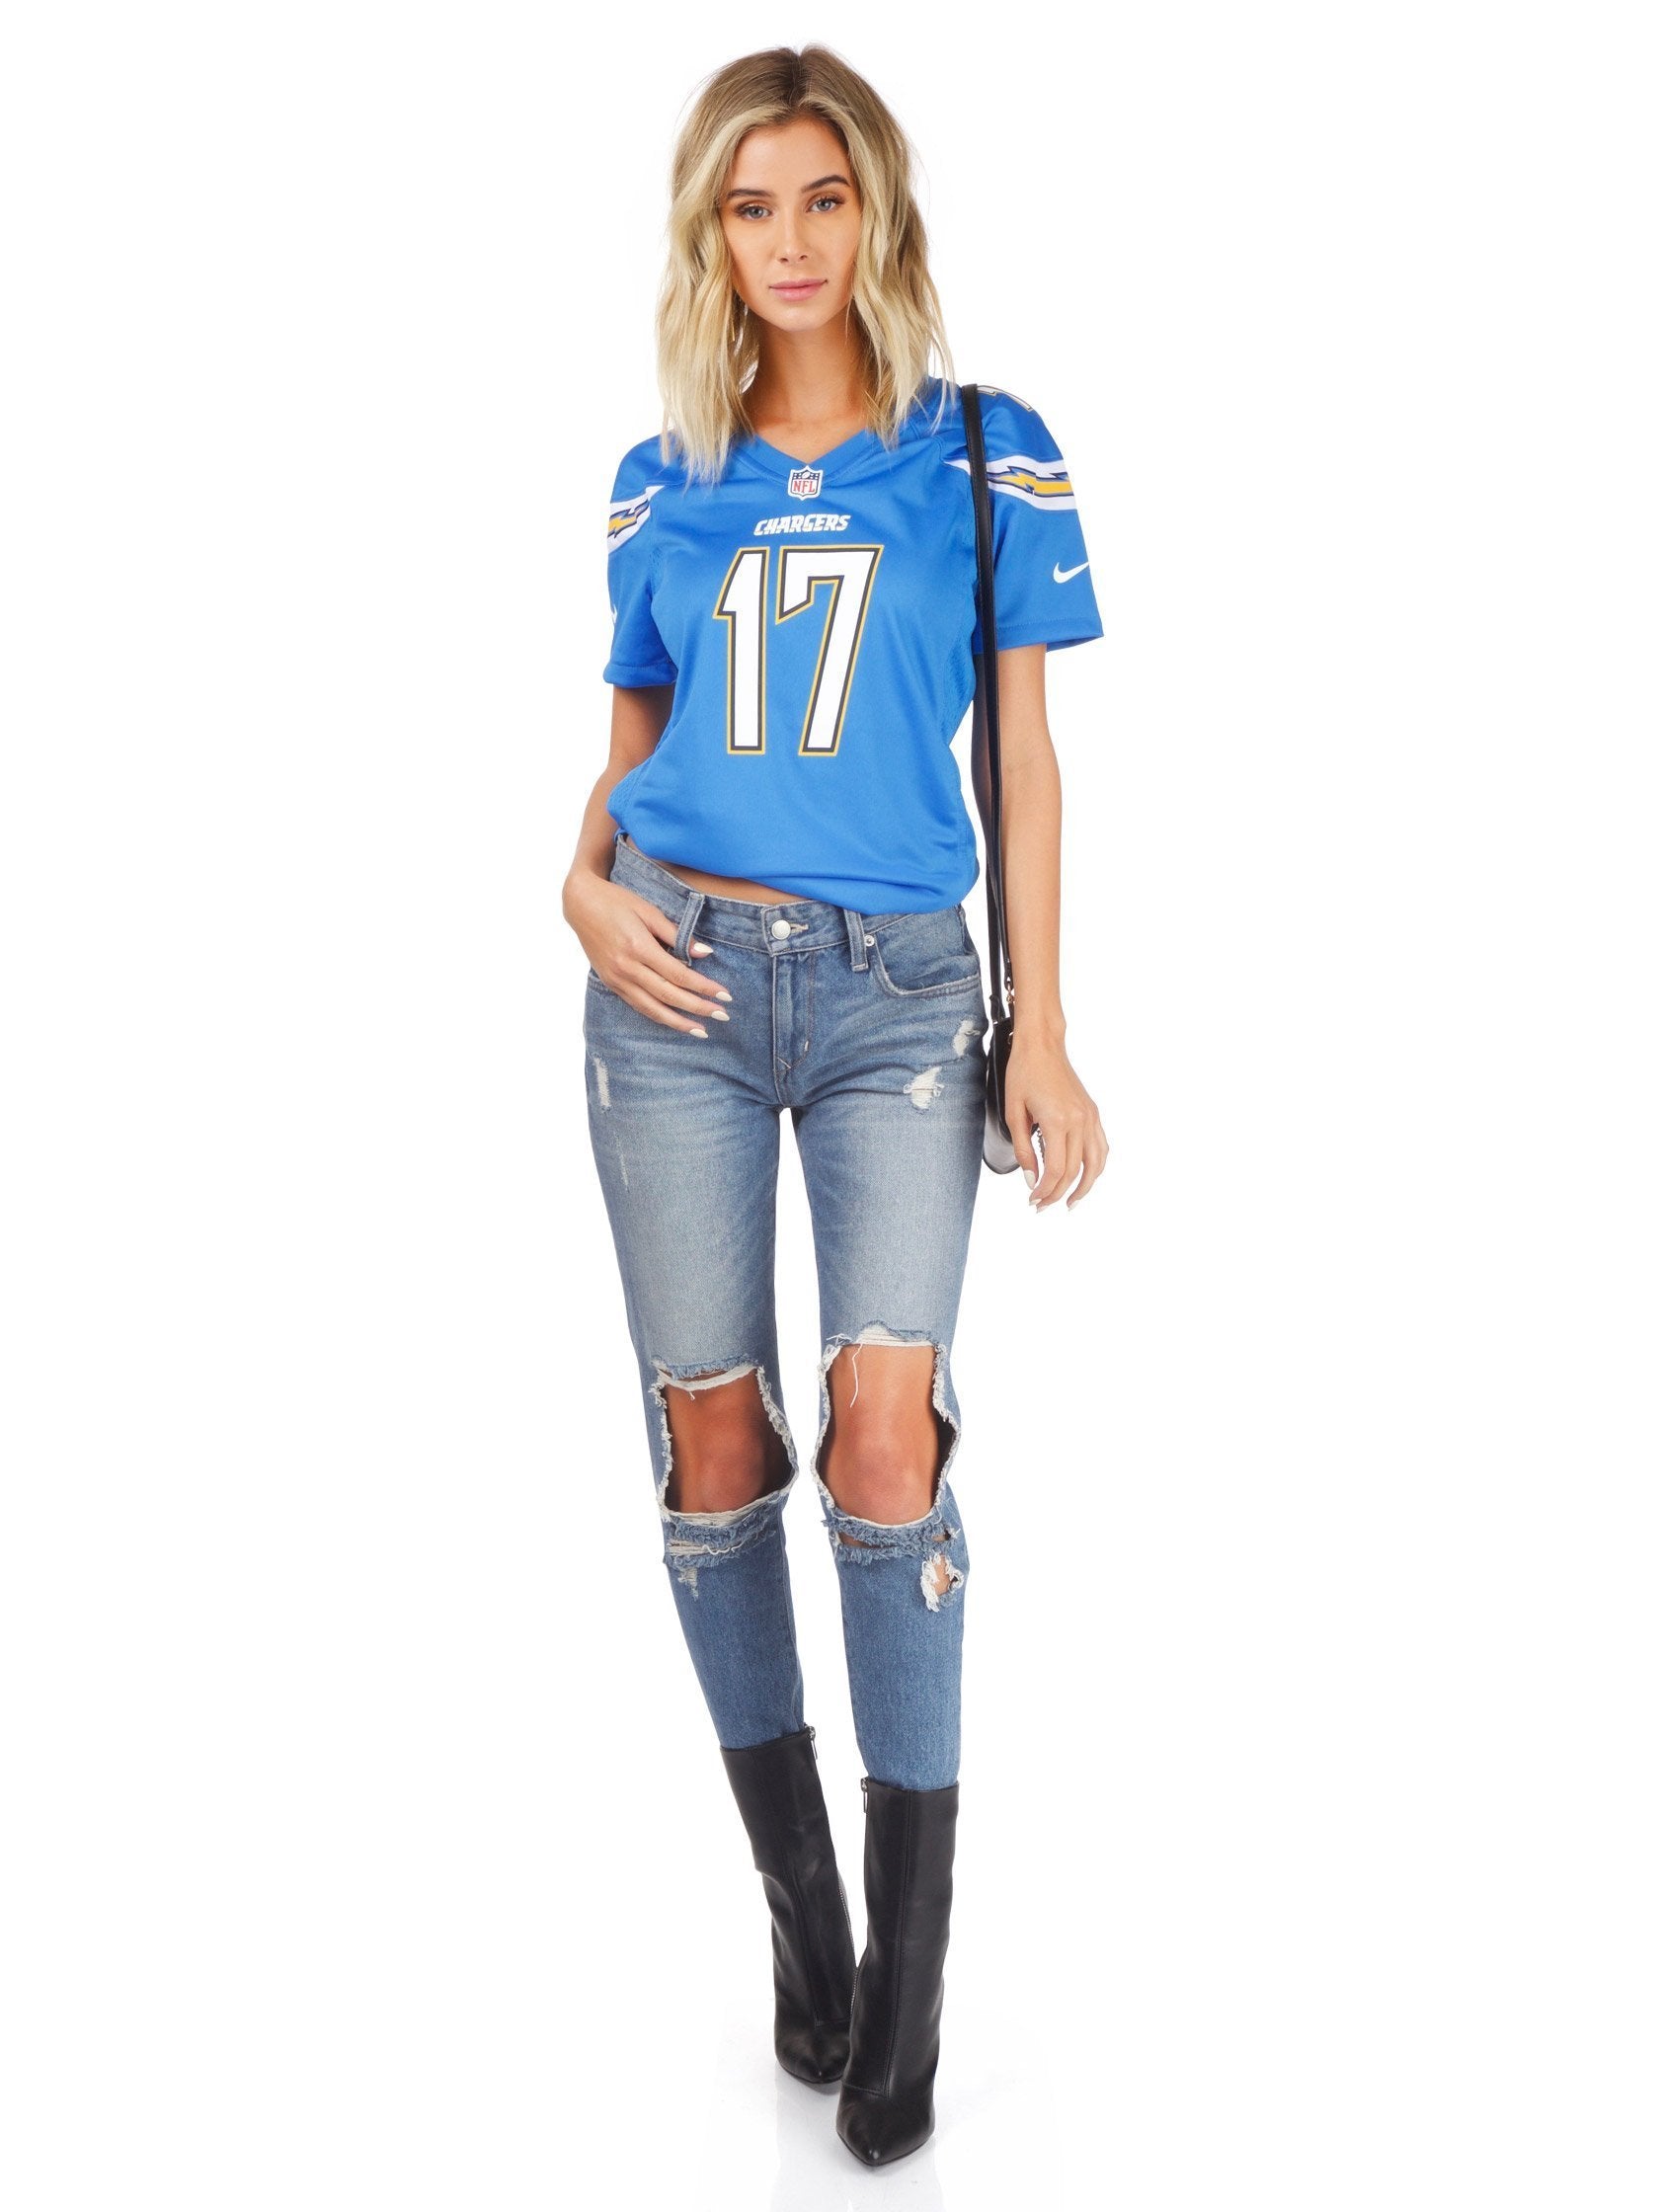 Girl wearing a top rental from FashionPass called La Chargers Jersey